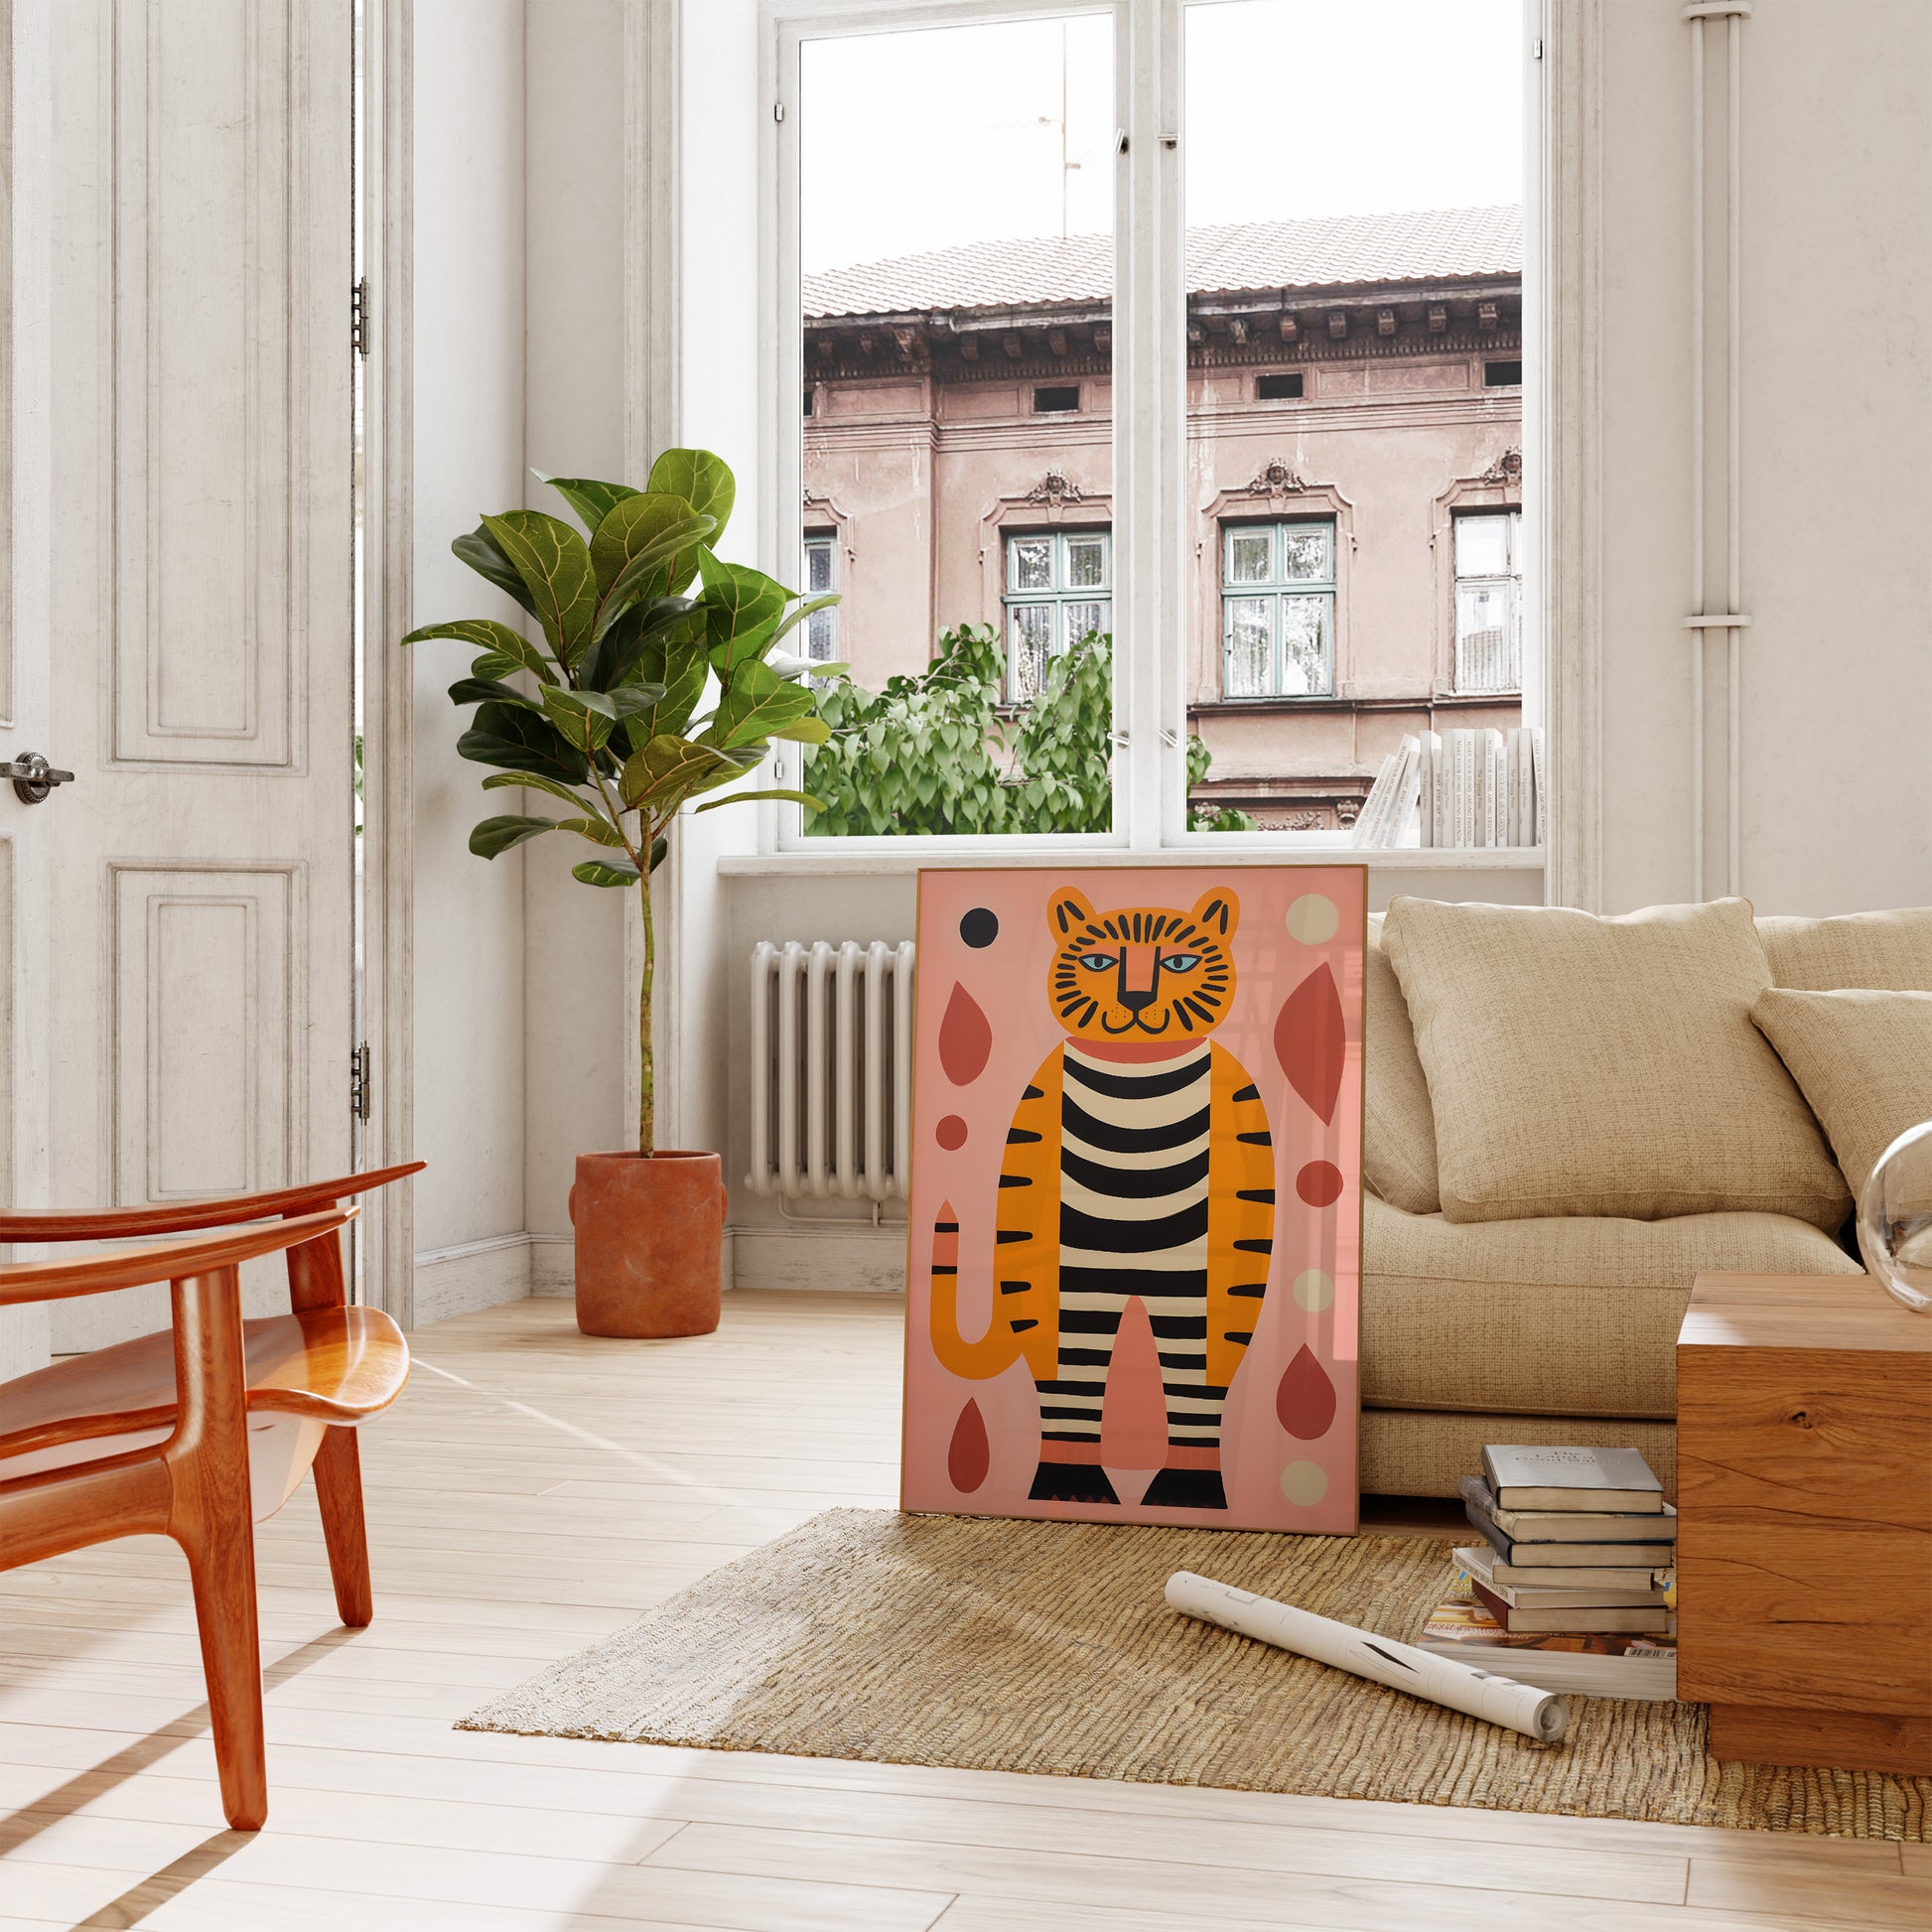 A colorful tiger painting leaning against a wall in a stylish living room with furniture and plants.